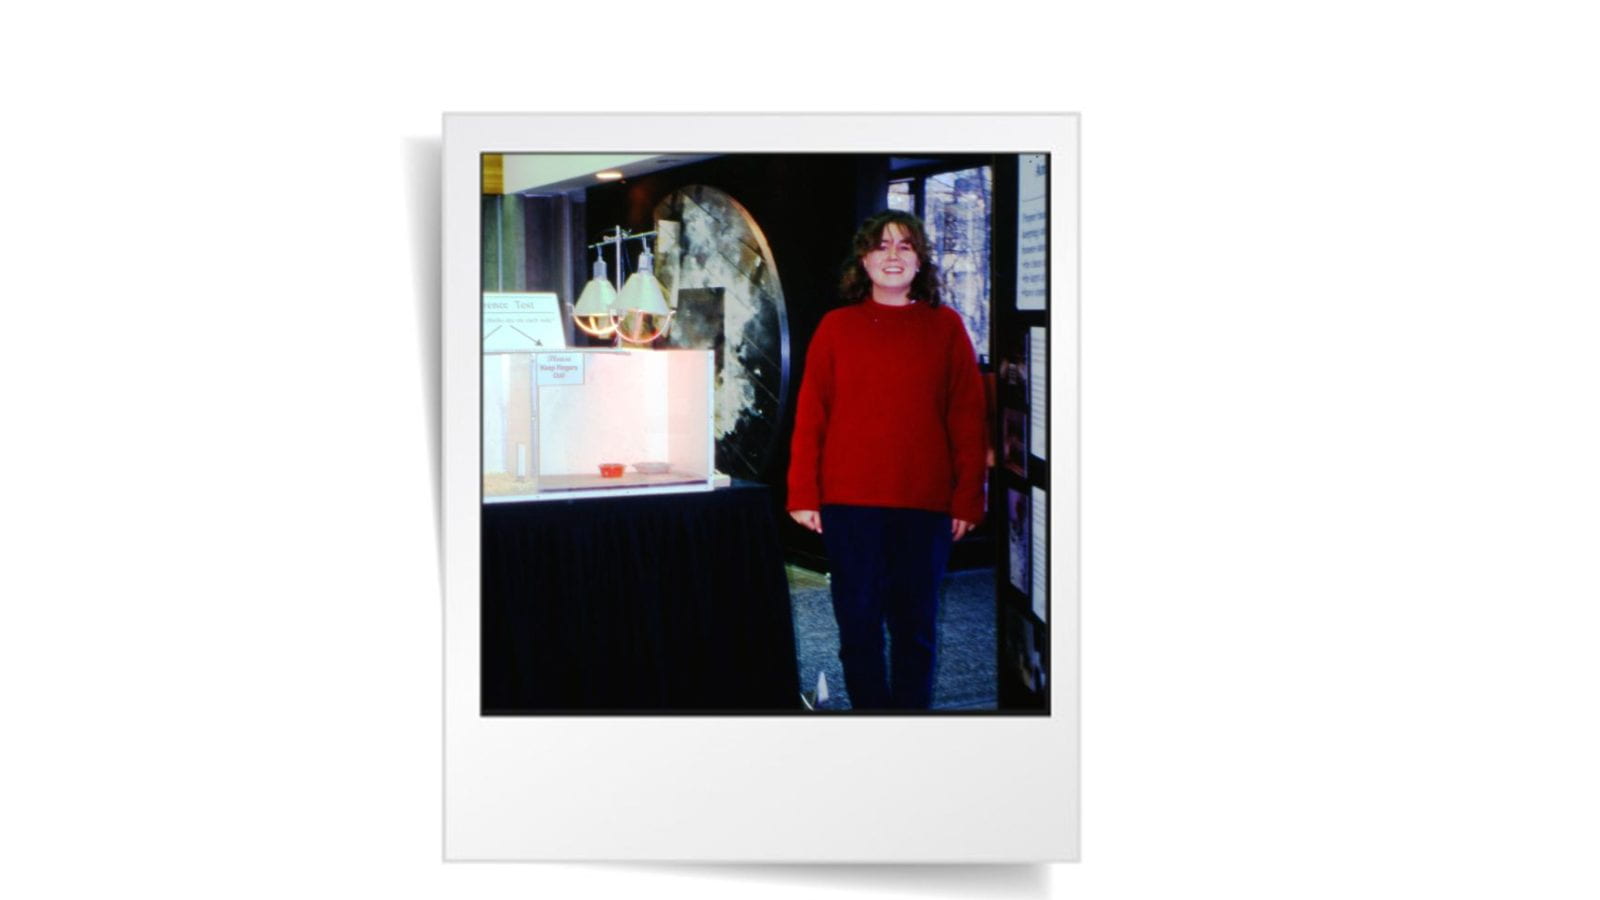 Anne Malleau, a CCSAW alum, pictured in the 1990s alongside her presentation on chick preferences.